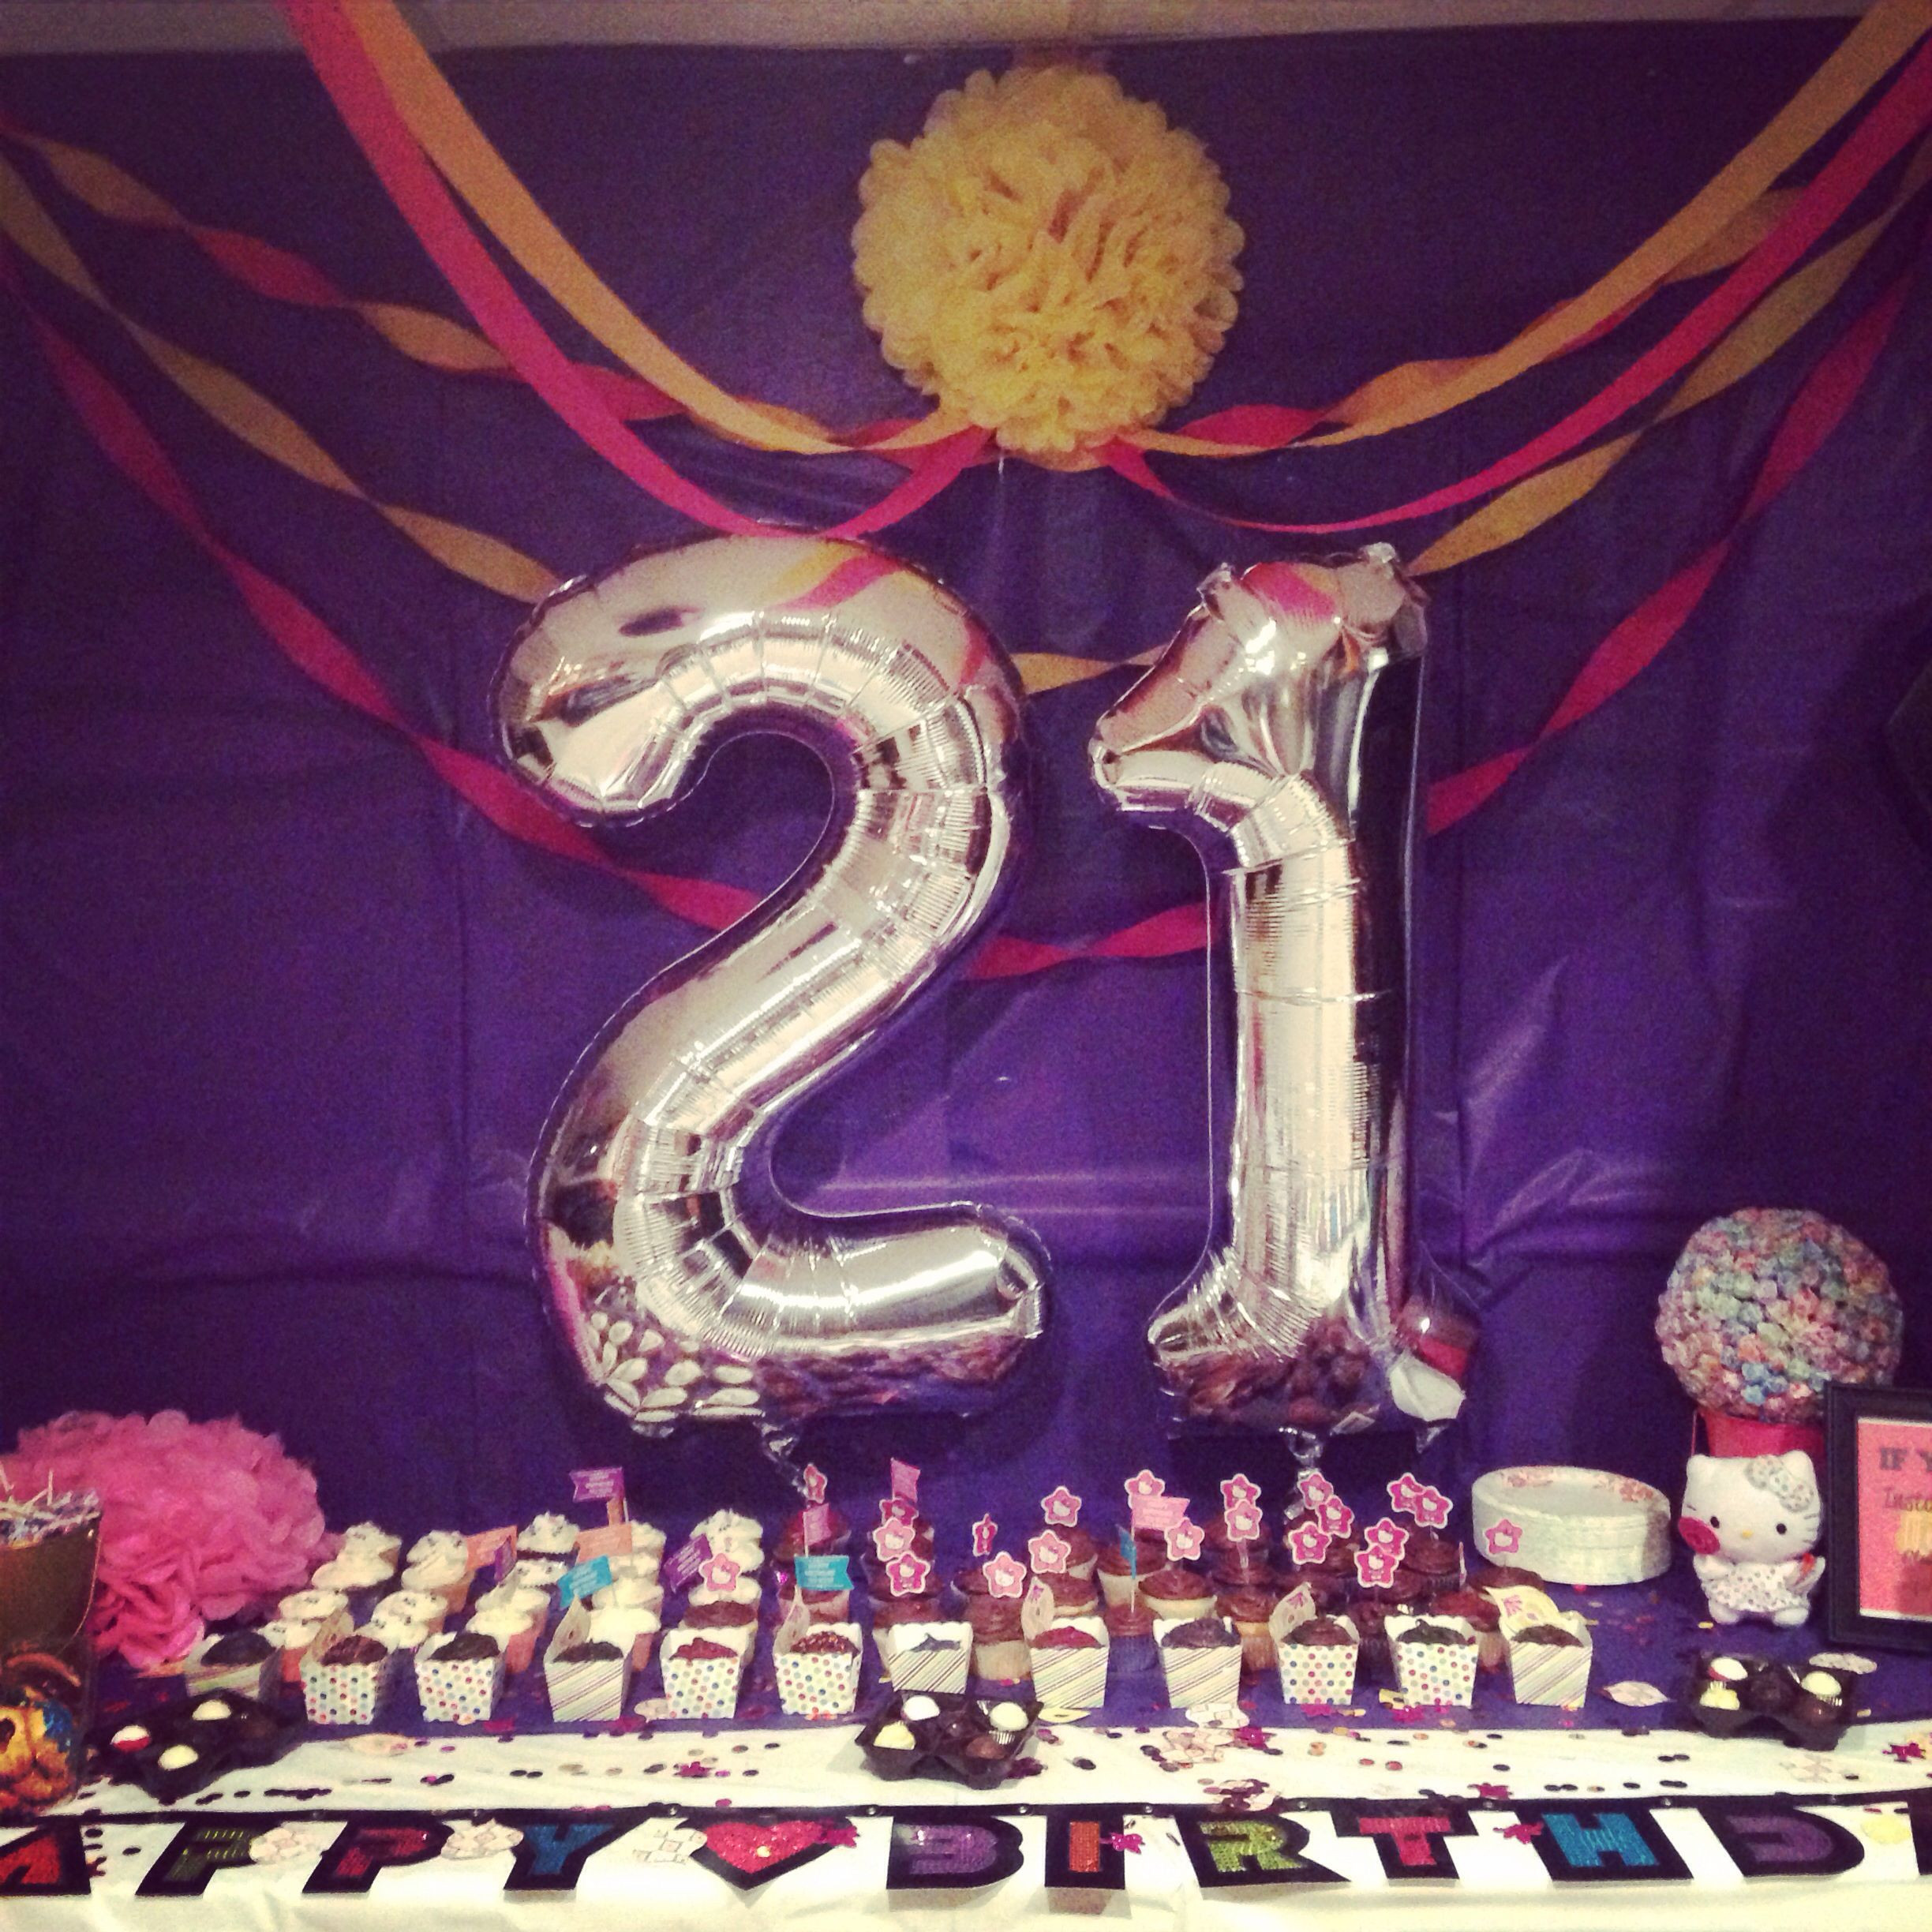 Ideas For A 21St Birthday Party
 Best 25 21st birthday decorations ideas on Pinterest